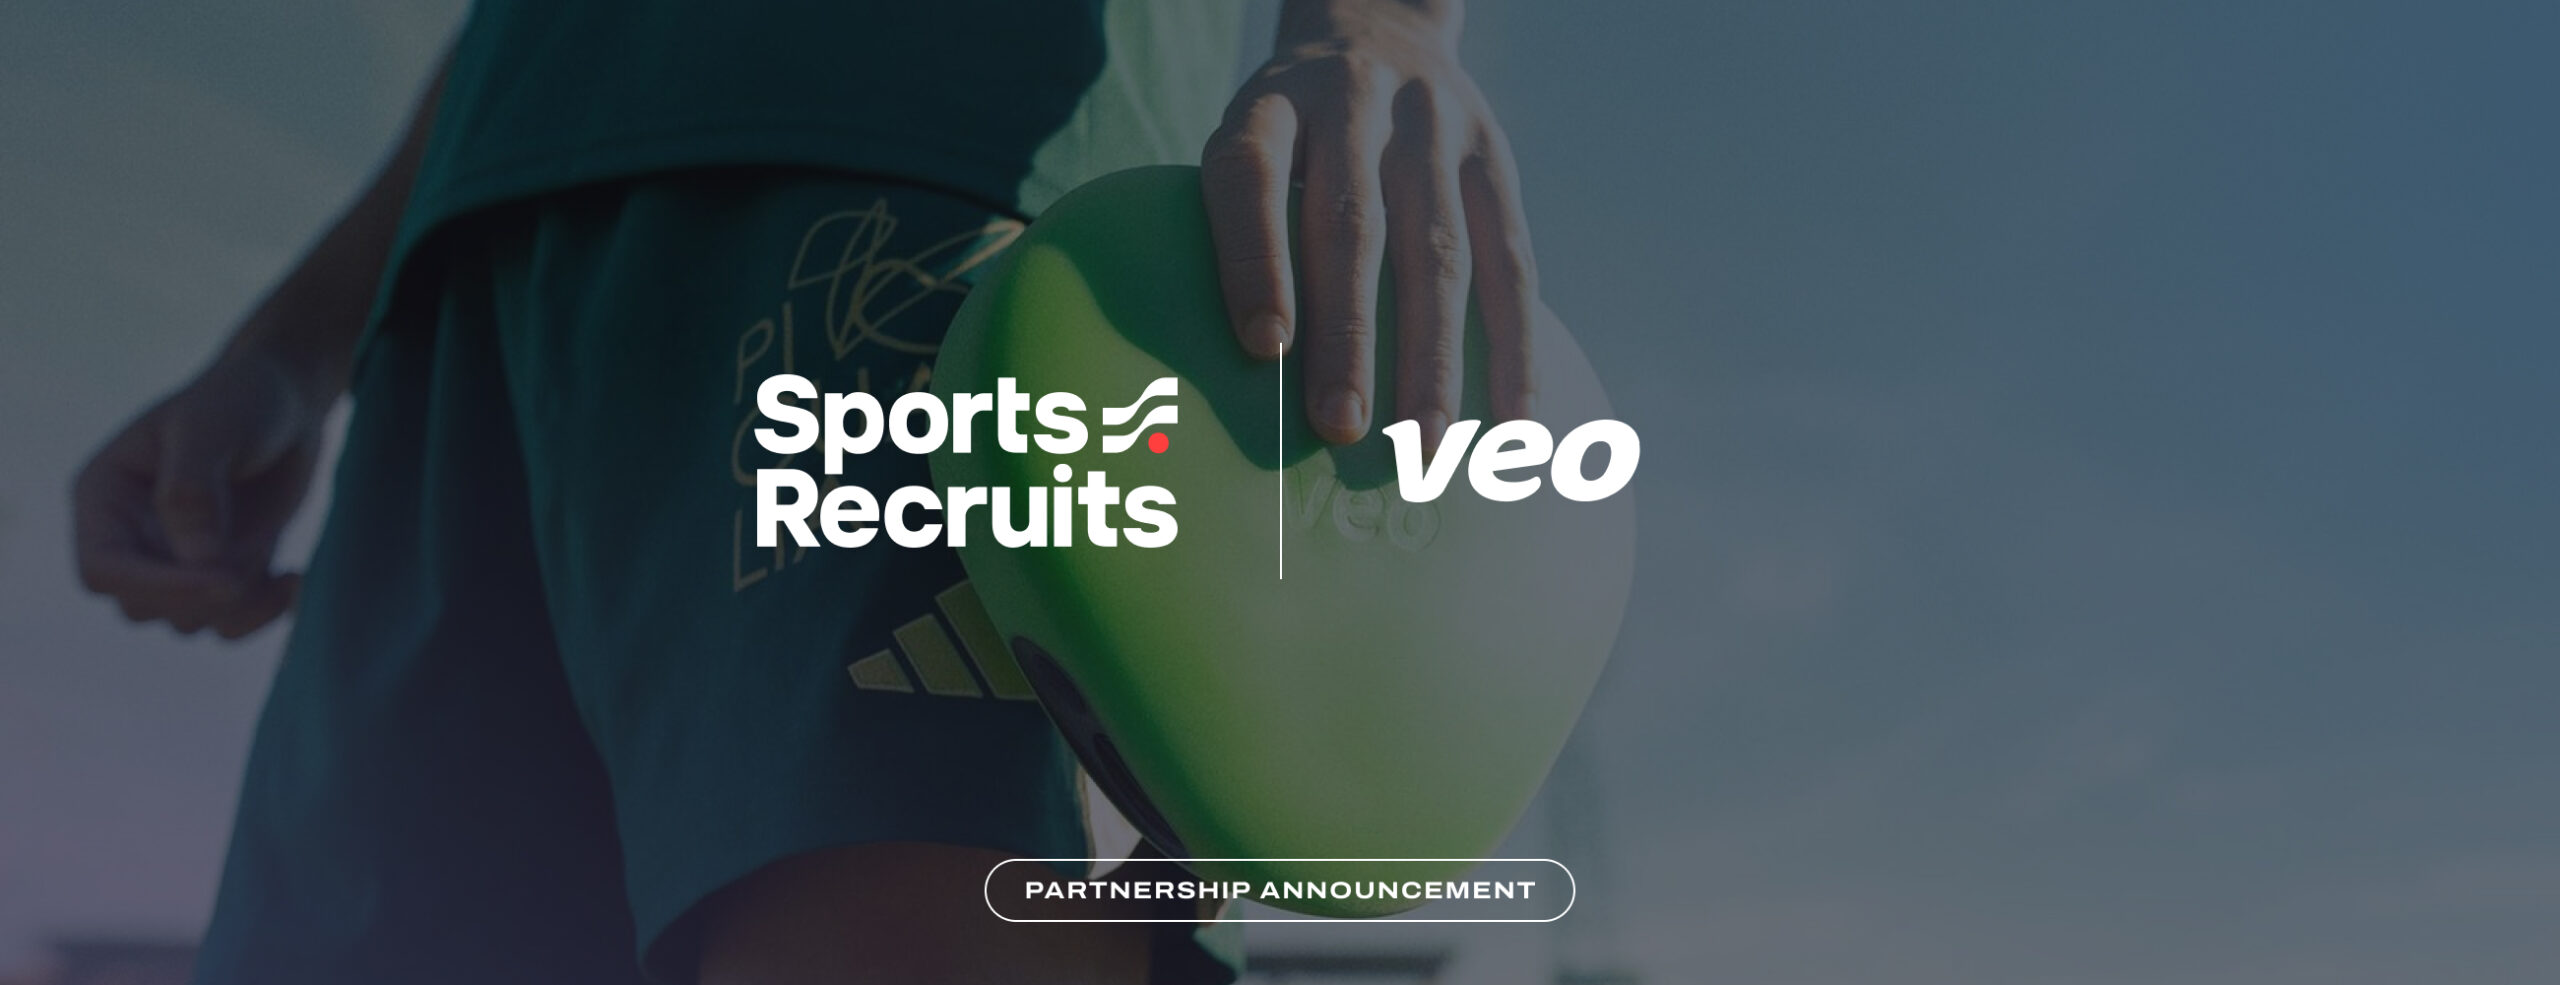 SportsRecruits and Veo Partnership and Integration